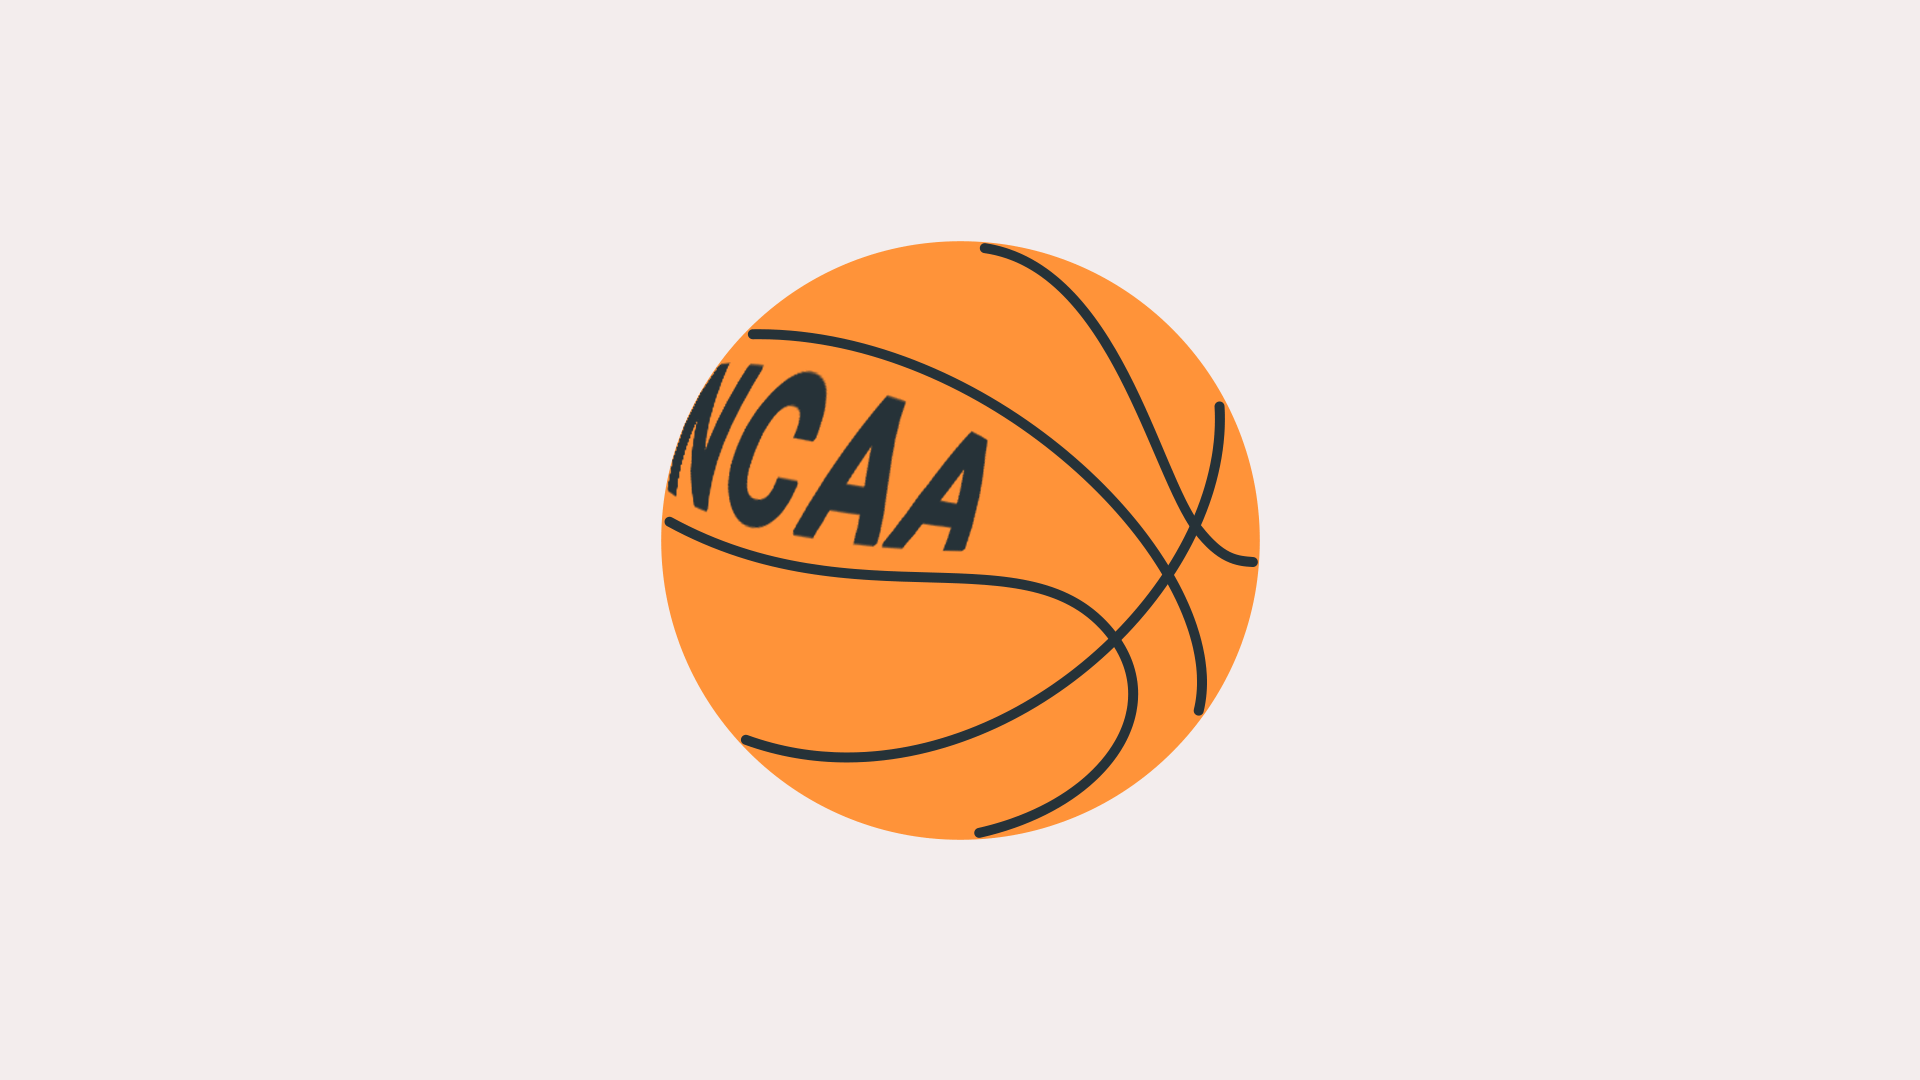 Watch NCAA live in March Madness with a VPN